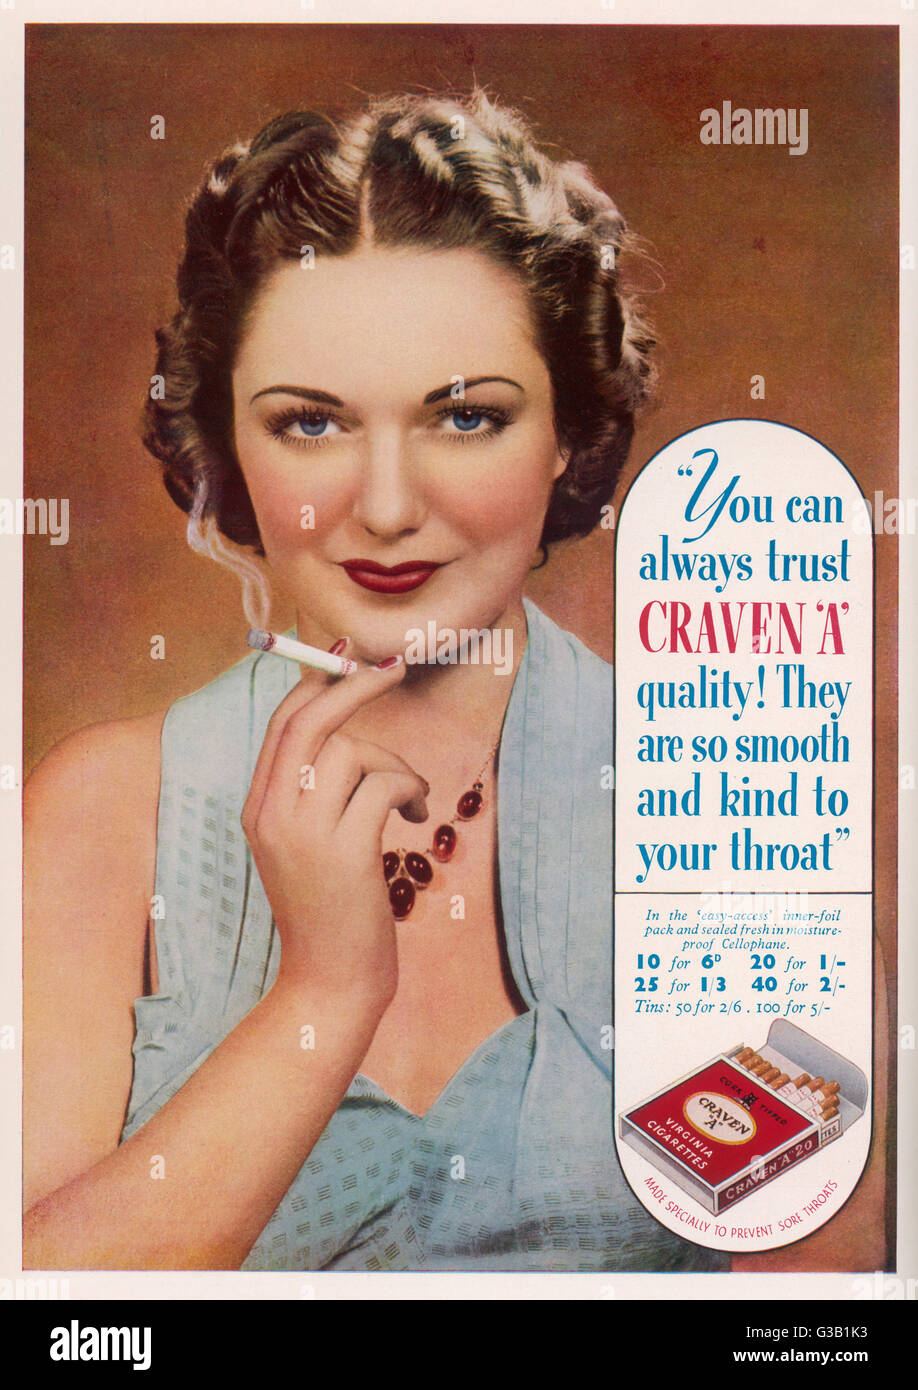 Craven A cigarettes -  you can always trust the quality        Date: 1937 Stock Photo